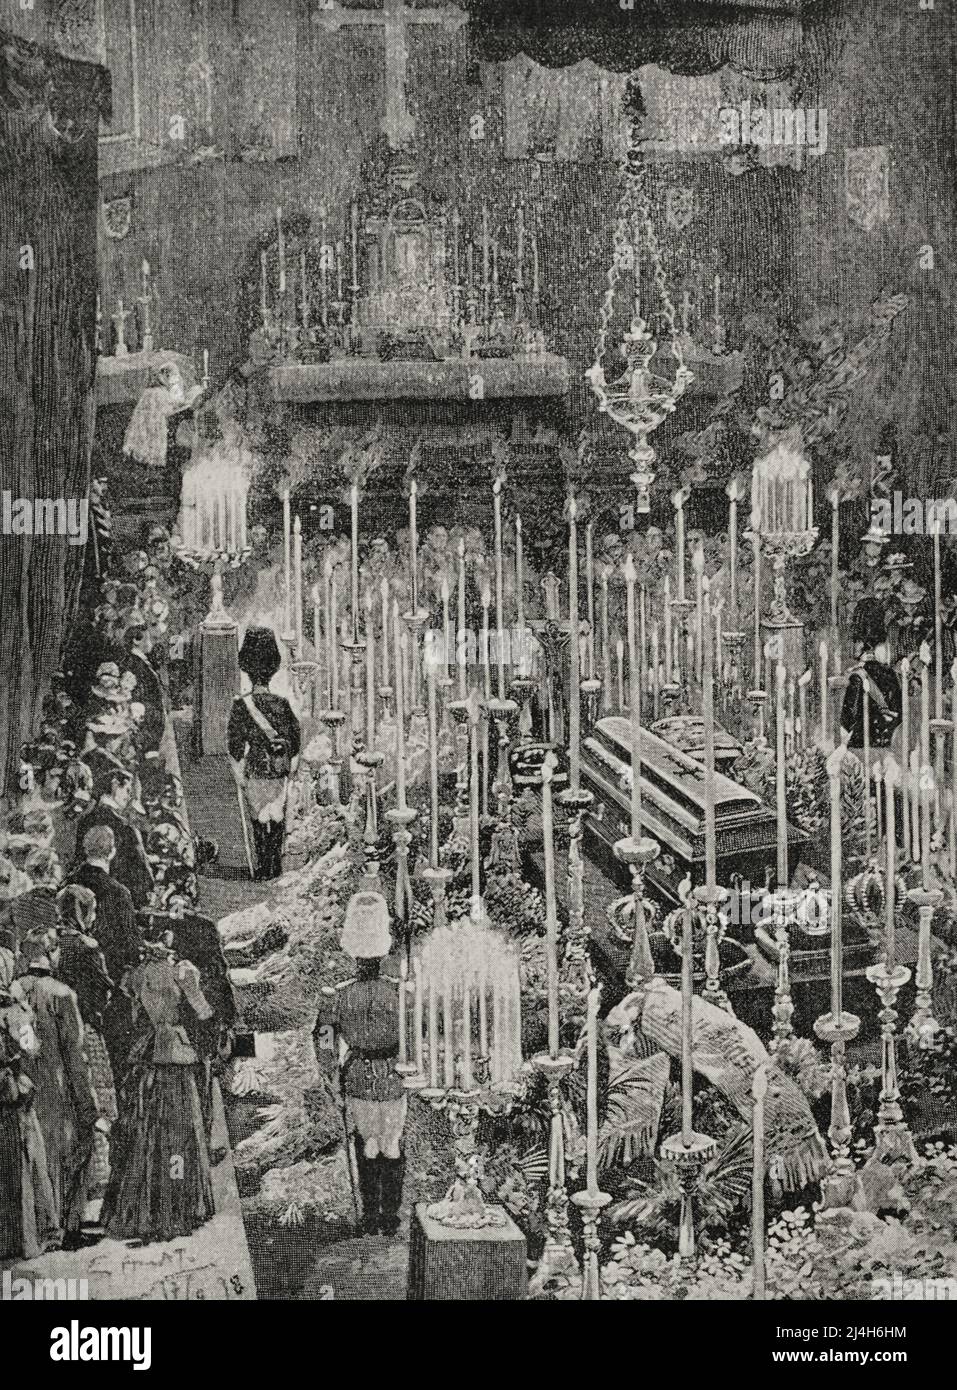 Vienna, Austria. Funerals of Empress Elisabeth (1837-1898). Empress consort of Austria (1854-1898). The people visiting Elisabeth's corpse in the chapel of the Hofburg Imperial Palace, 16 September 1898. Elisabeth was assassinated by an Italian anarchist, Luigi Lucheni, while walking along Lake Leman in Geneva. Photoengraving. La Ilustración Española y Americana, 1898. Stock Photo